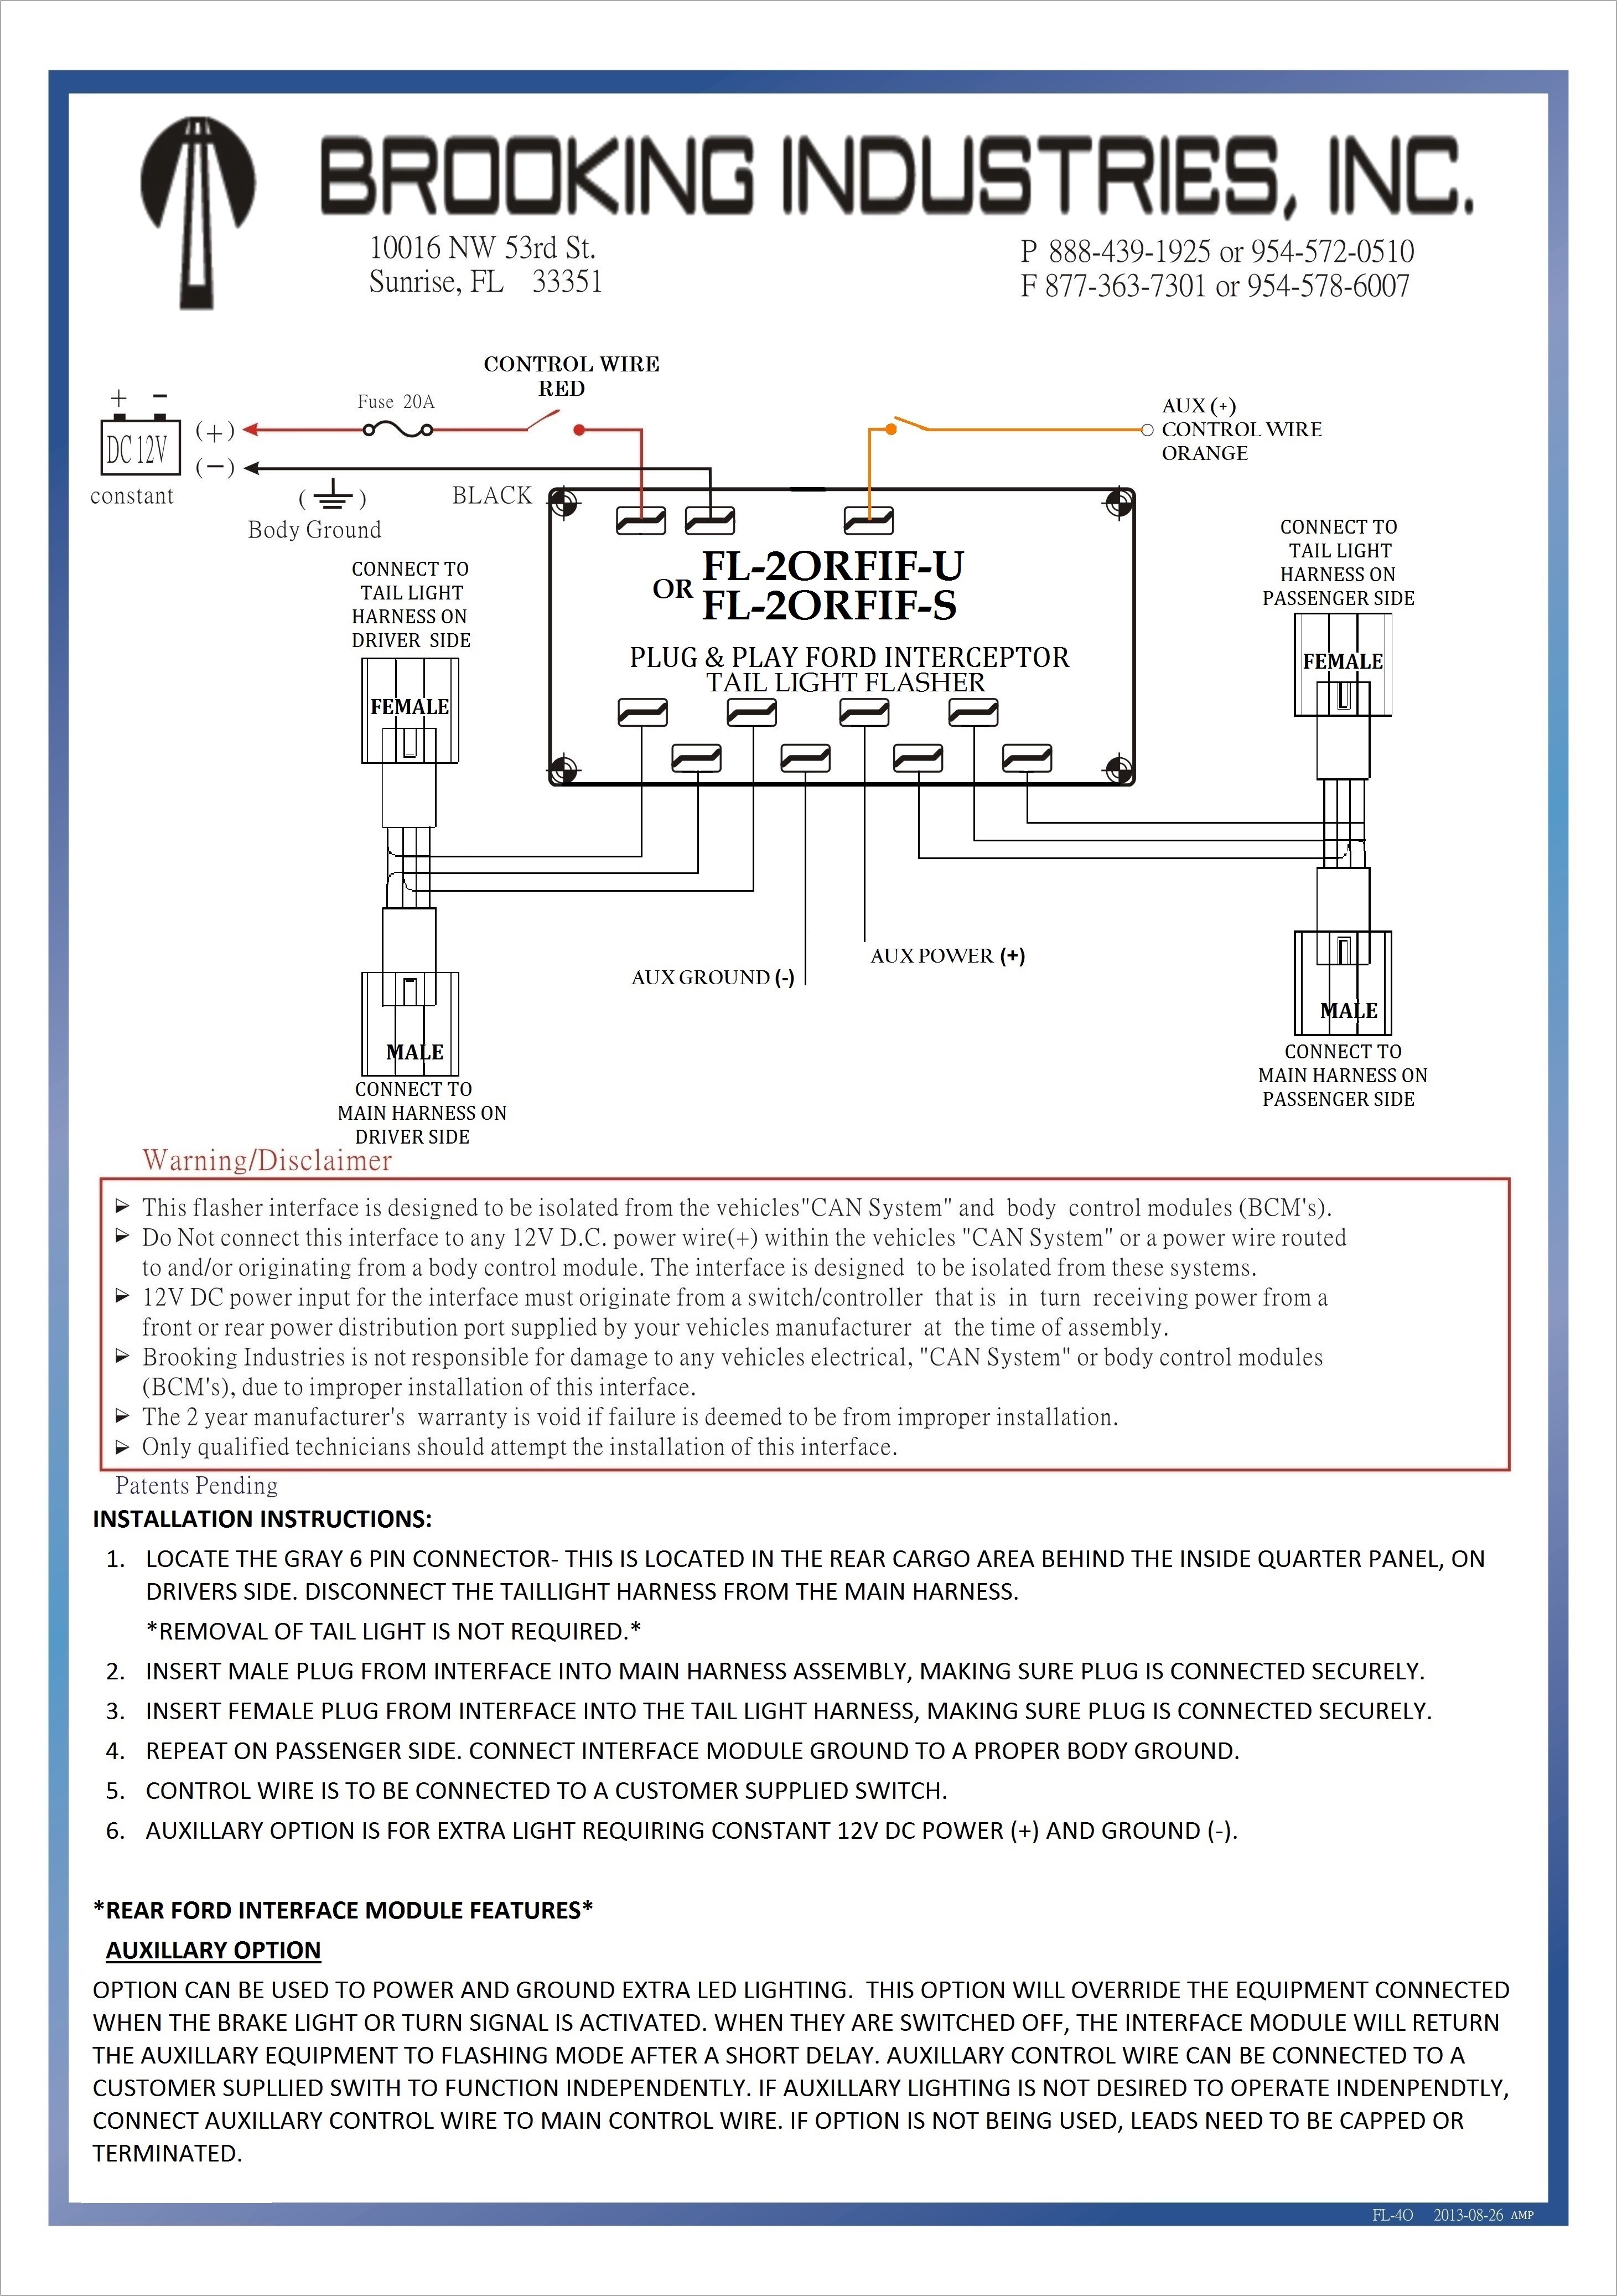 Ford Pin Trailer Wiring Diagram Galls St Siren Wire Ford Upfitter Switch Diagram Full